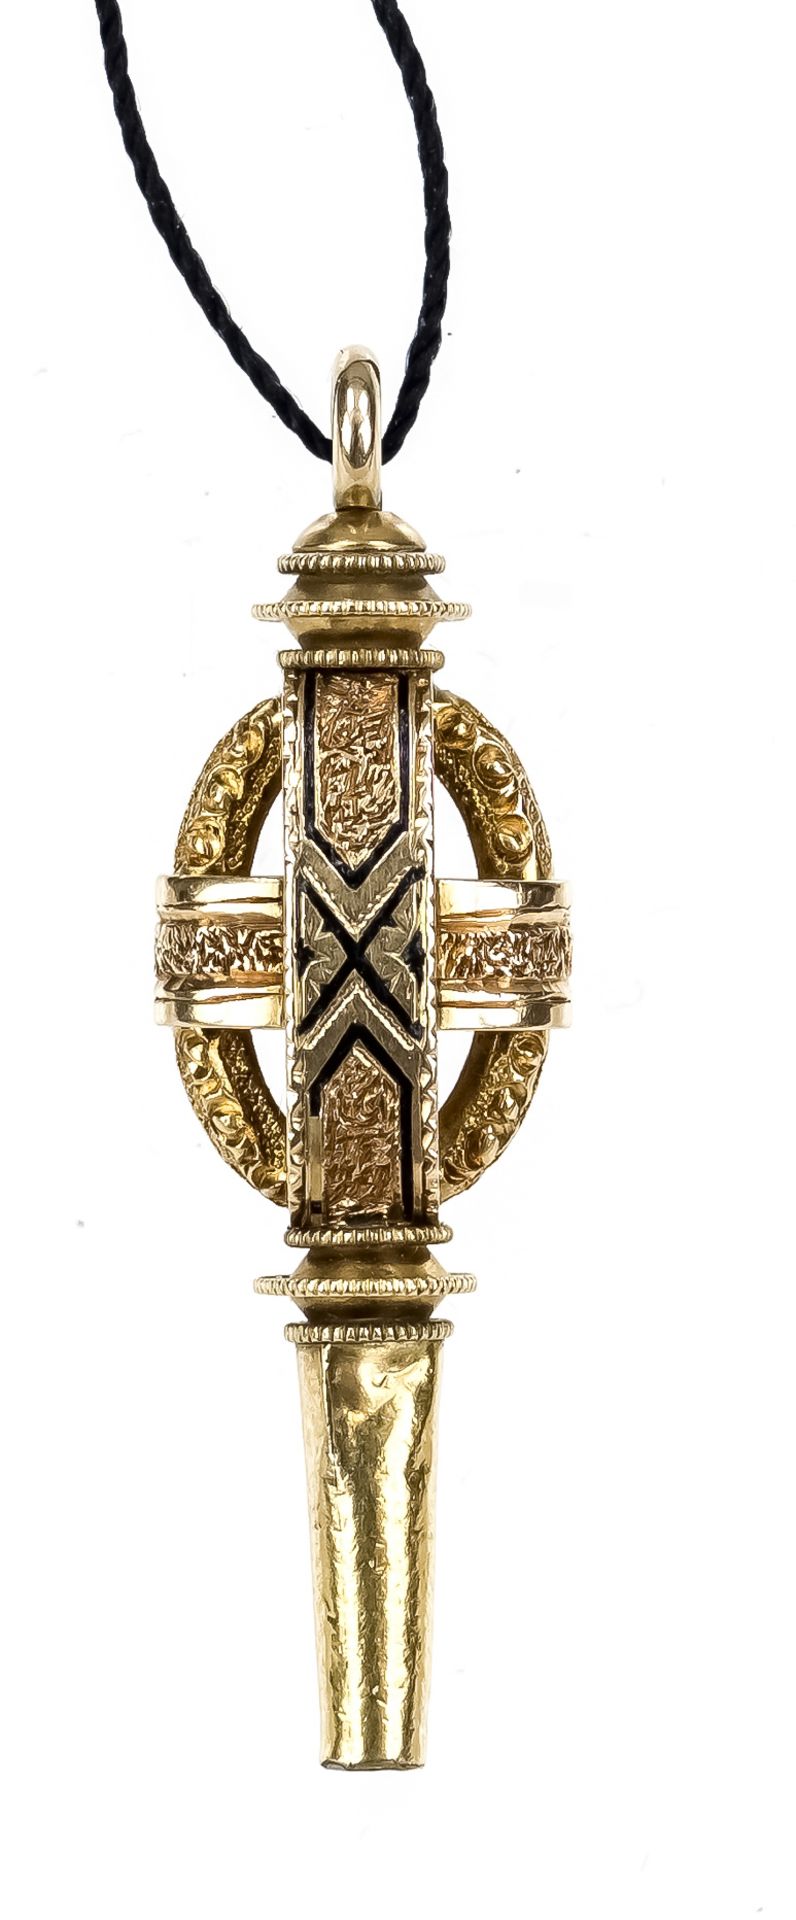 antique pocket watch key, GG 585/000, inlaid with e$maille, engraved, 19th century, length 3.6cm,